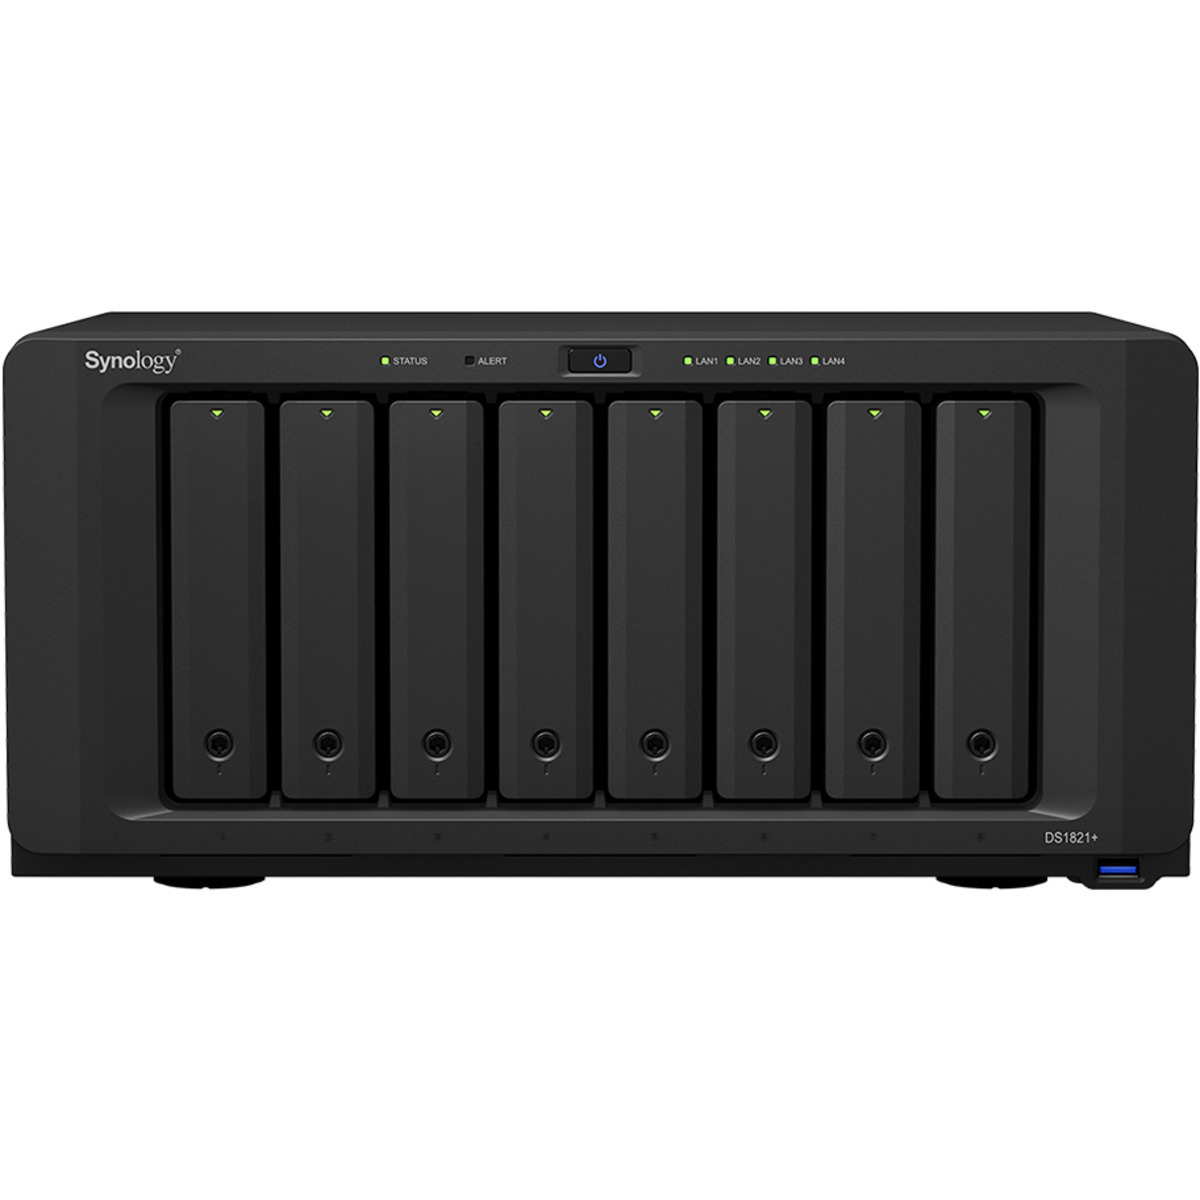 Synology DiskStation DS1821+ 64tb 8-Bay Desktop Multimedia / Power User / Business NAS - Network Attached Storage Device 8x8tb Seagate IronWolf Pro ST8000NT001 3.5 7200rpm SATA 6Gb/s HDD NAS Class Drives Installed - Burn-In Tested - ON SALE - FREE RAM UPGRADE DiskStation DS1821+